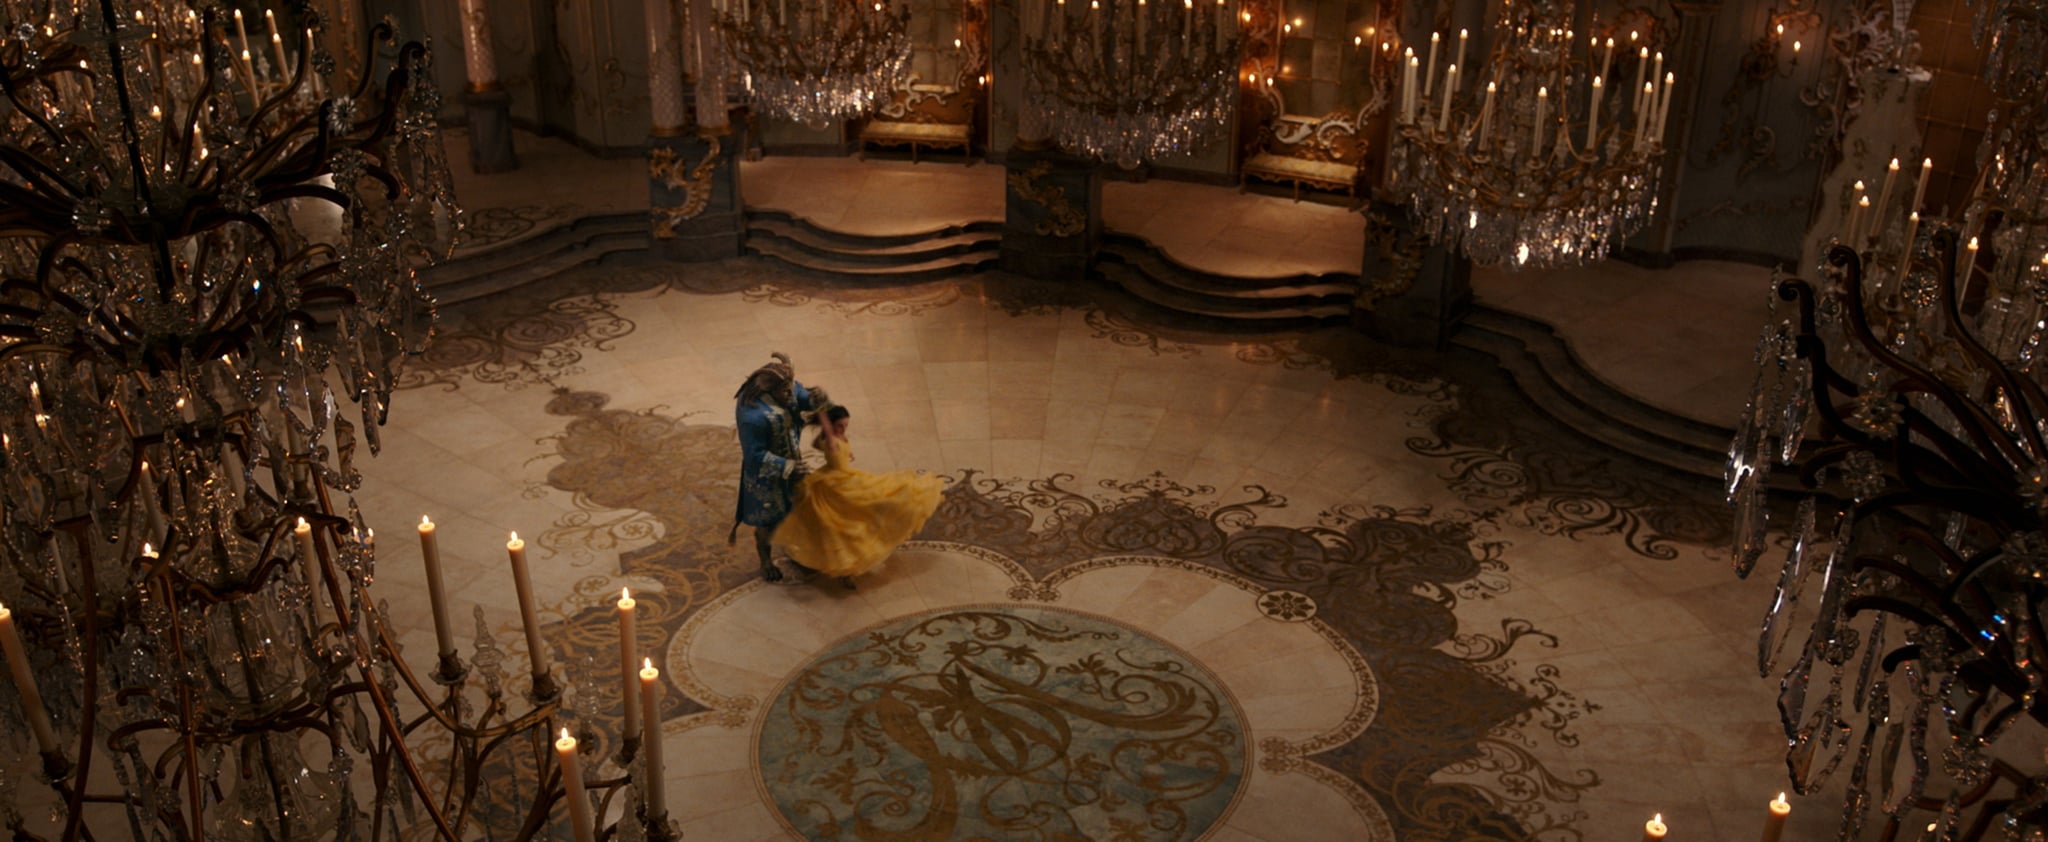 BEAUTY AND THE BEAST, from left: Dan Stevens, Emma Watson, 2017.  Walt Disney Pictures /courtesy Everett Collection